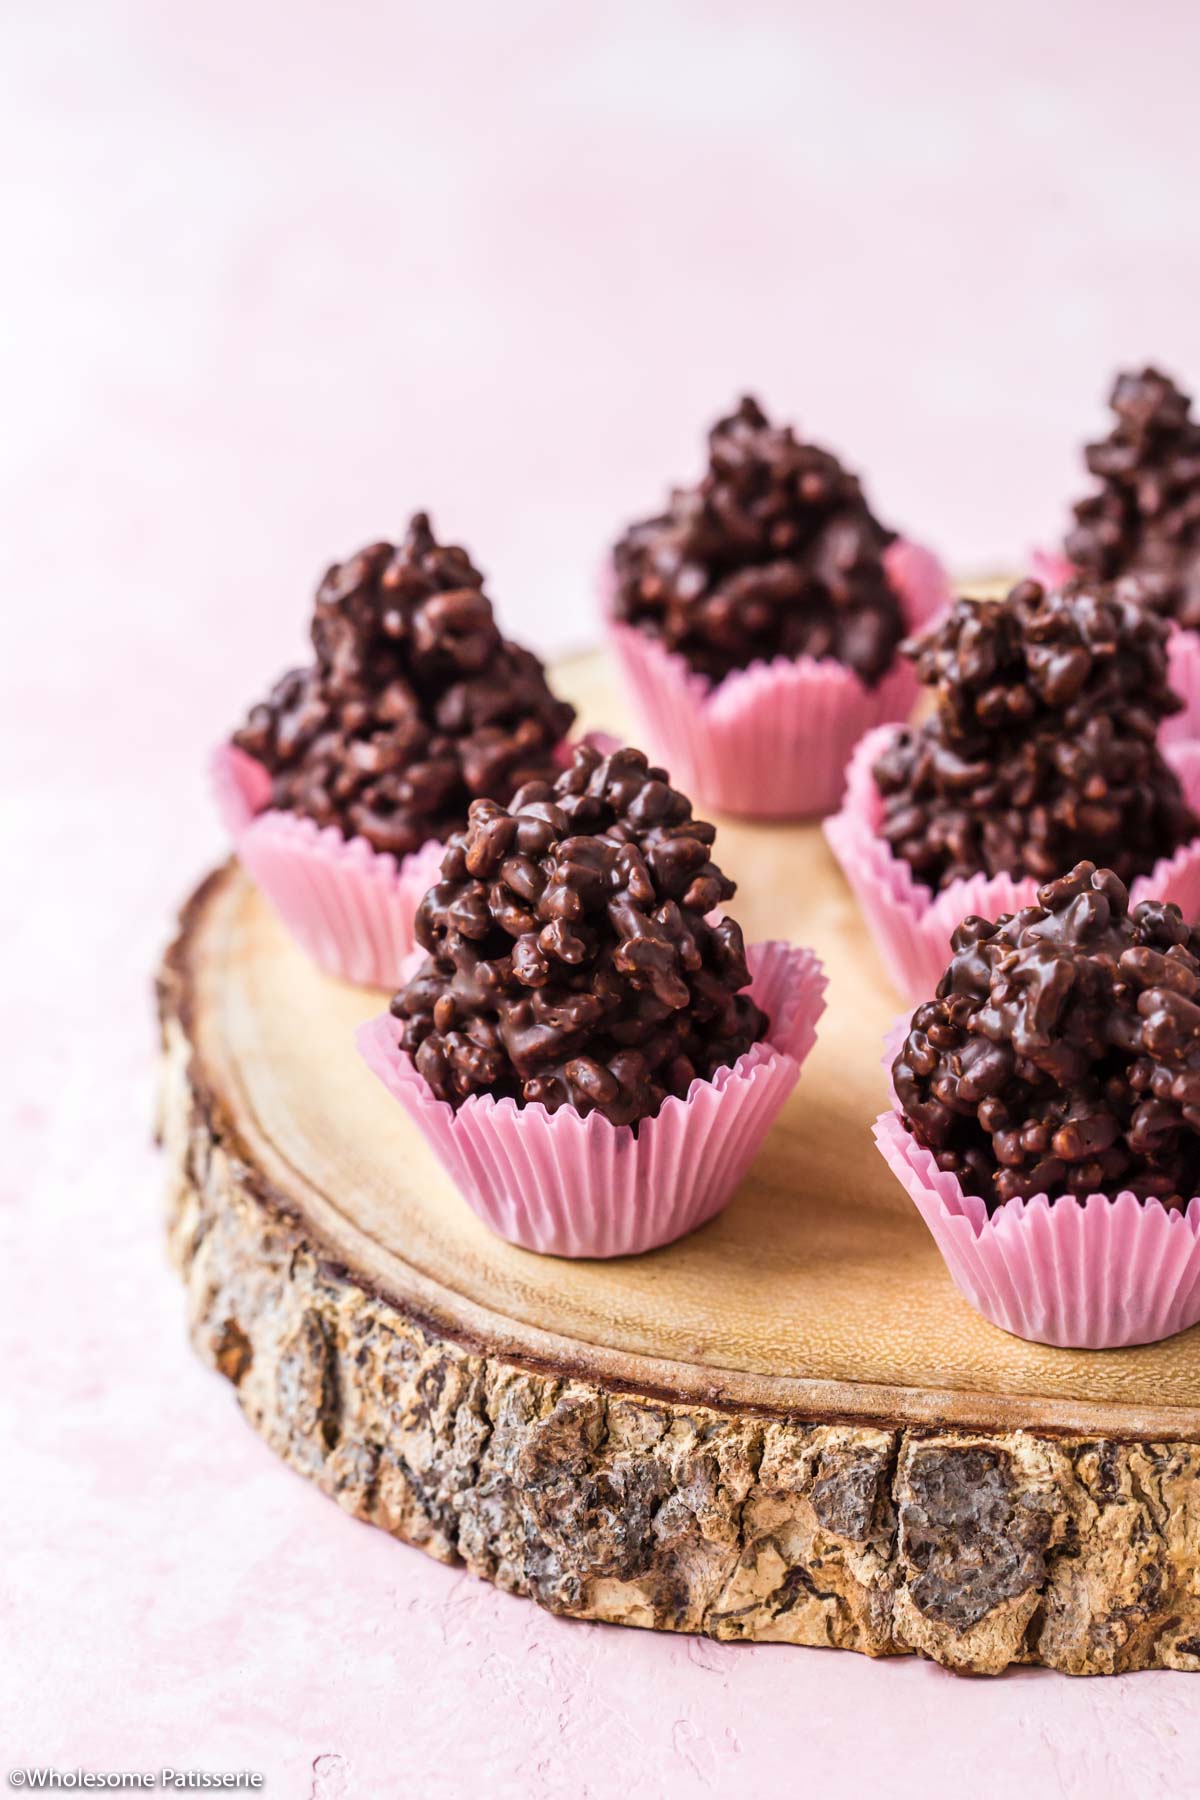 Chocolate Crackles Without Copha - Wholesome Patisserie